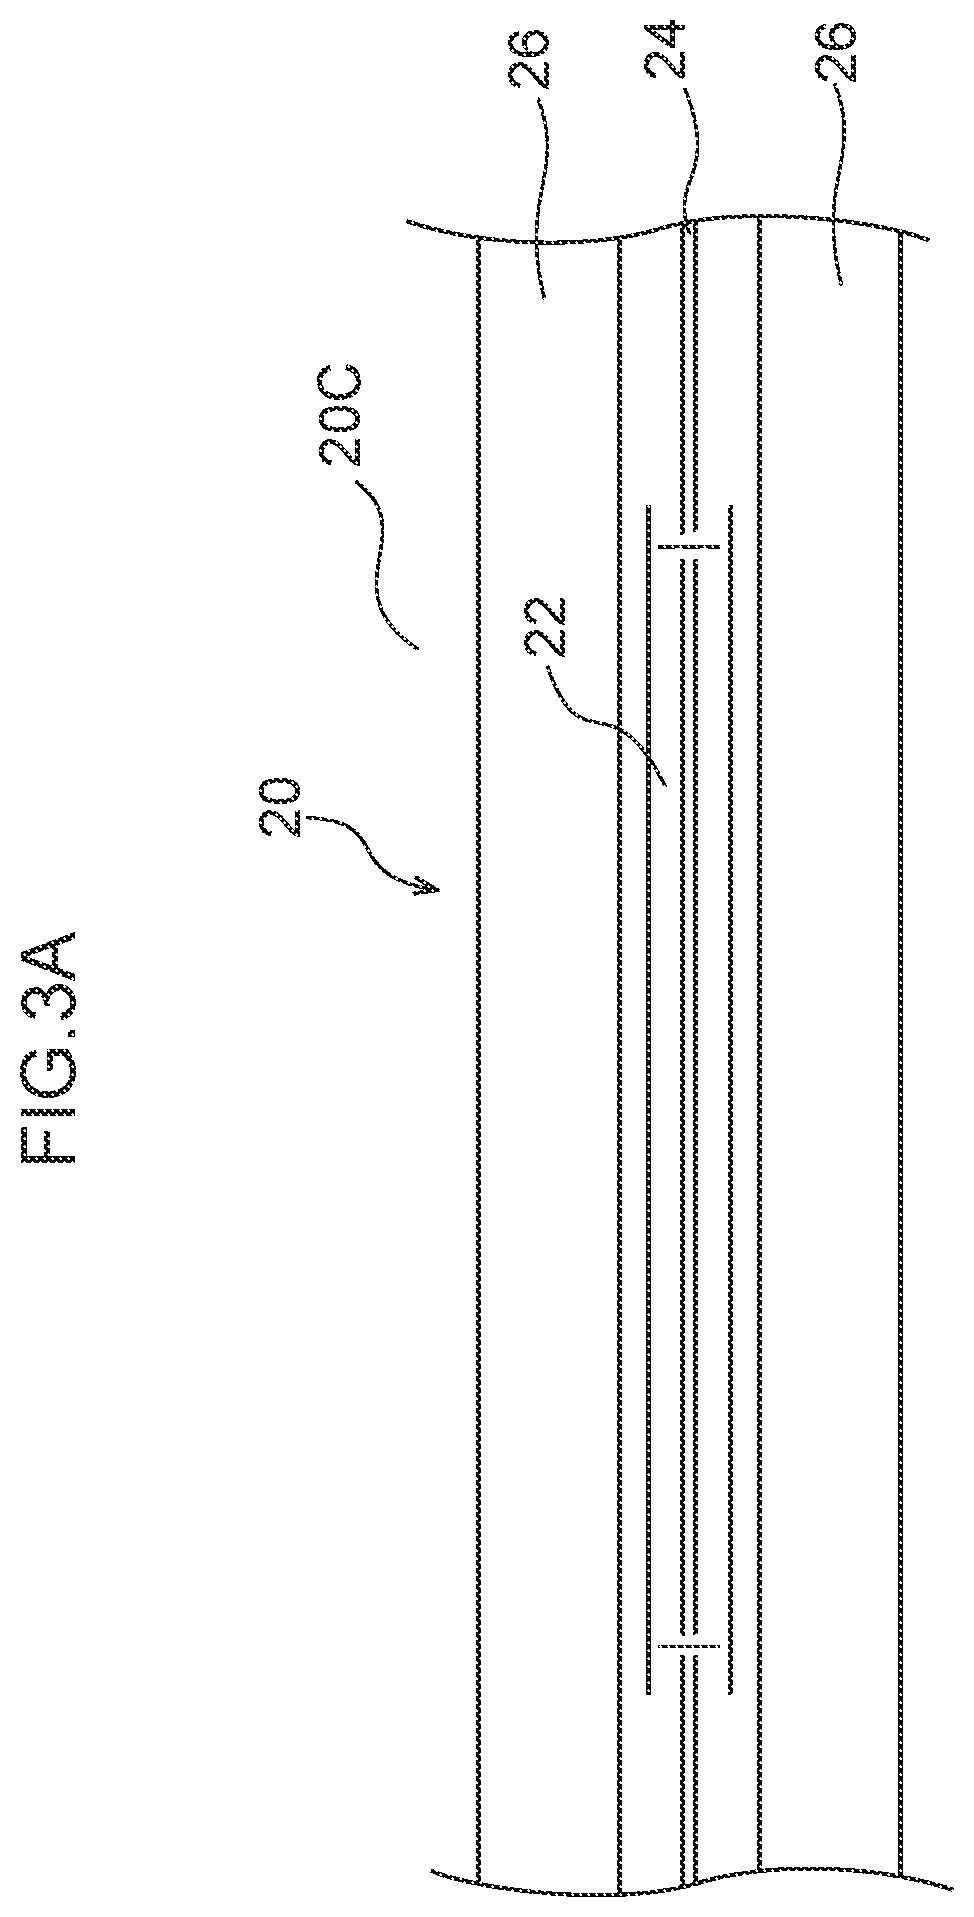 Resin fuel tank and blow molding mold for molding the same